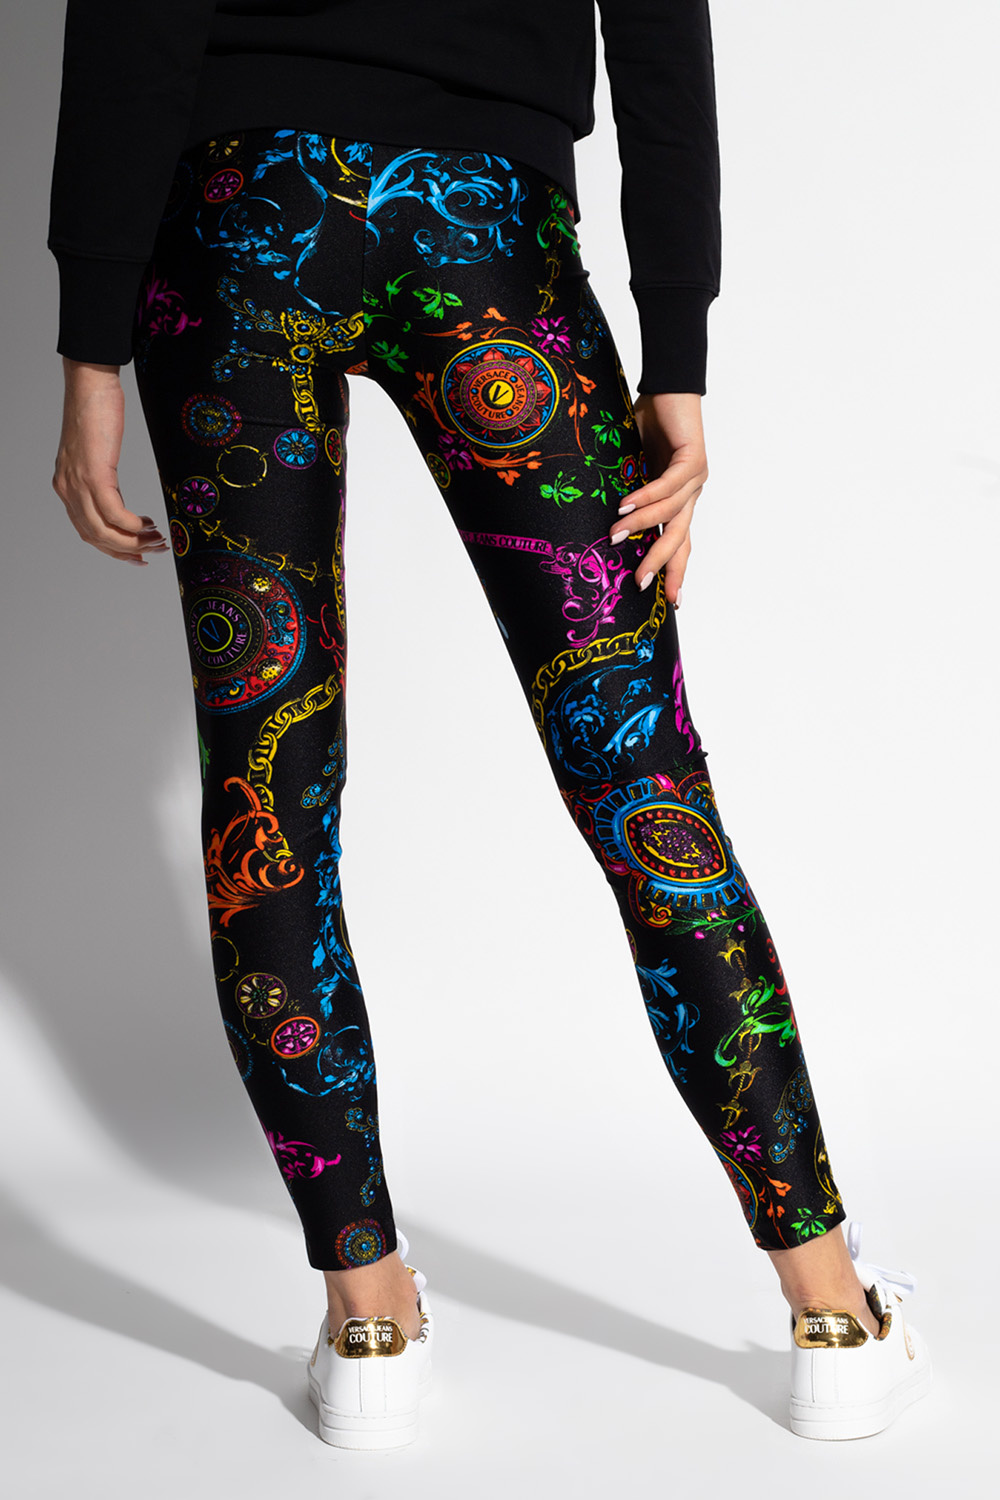 Versace Jeans Couture Barocco - Womens Lipsy Satin Dress - IetpShops, printed leggings